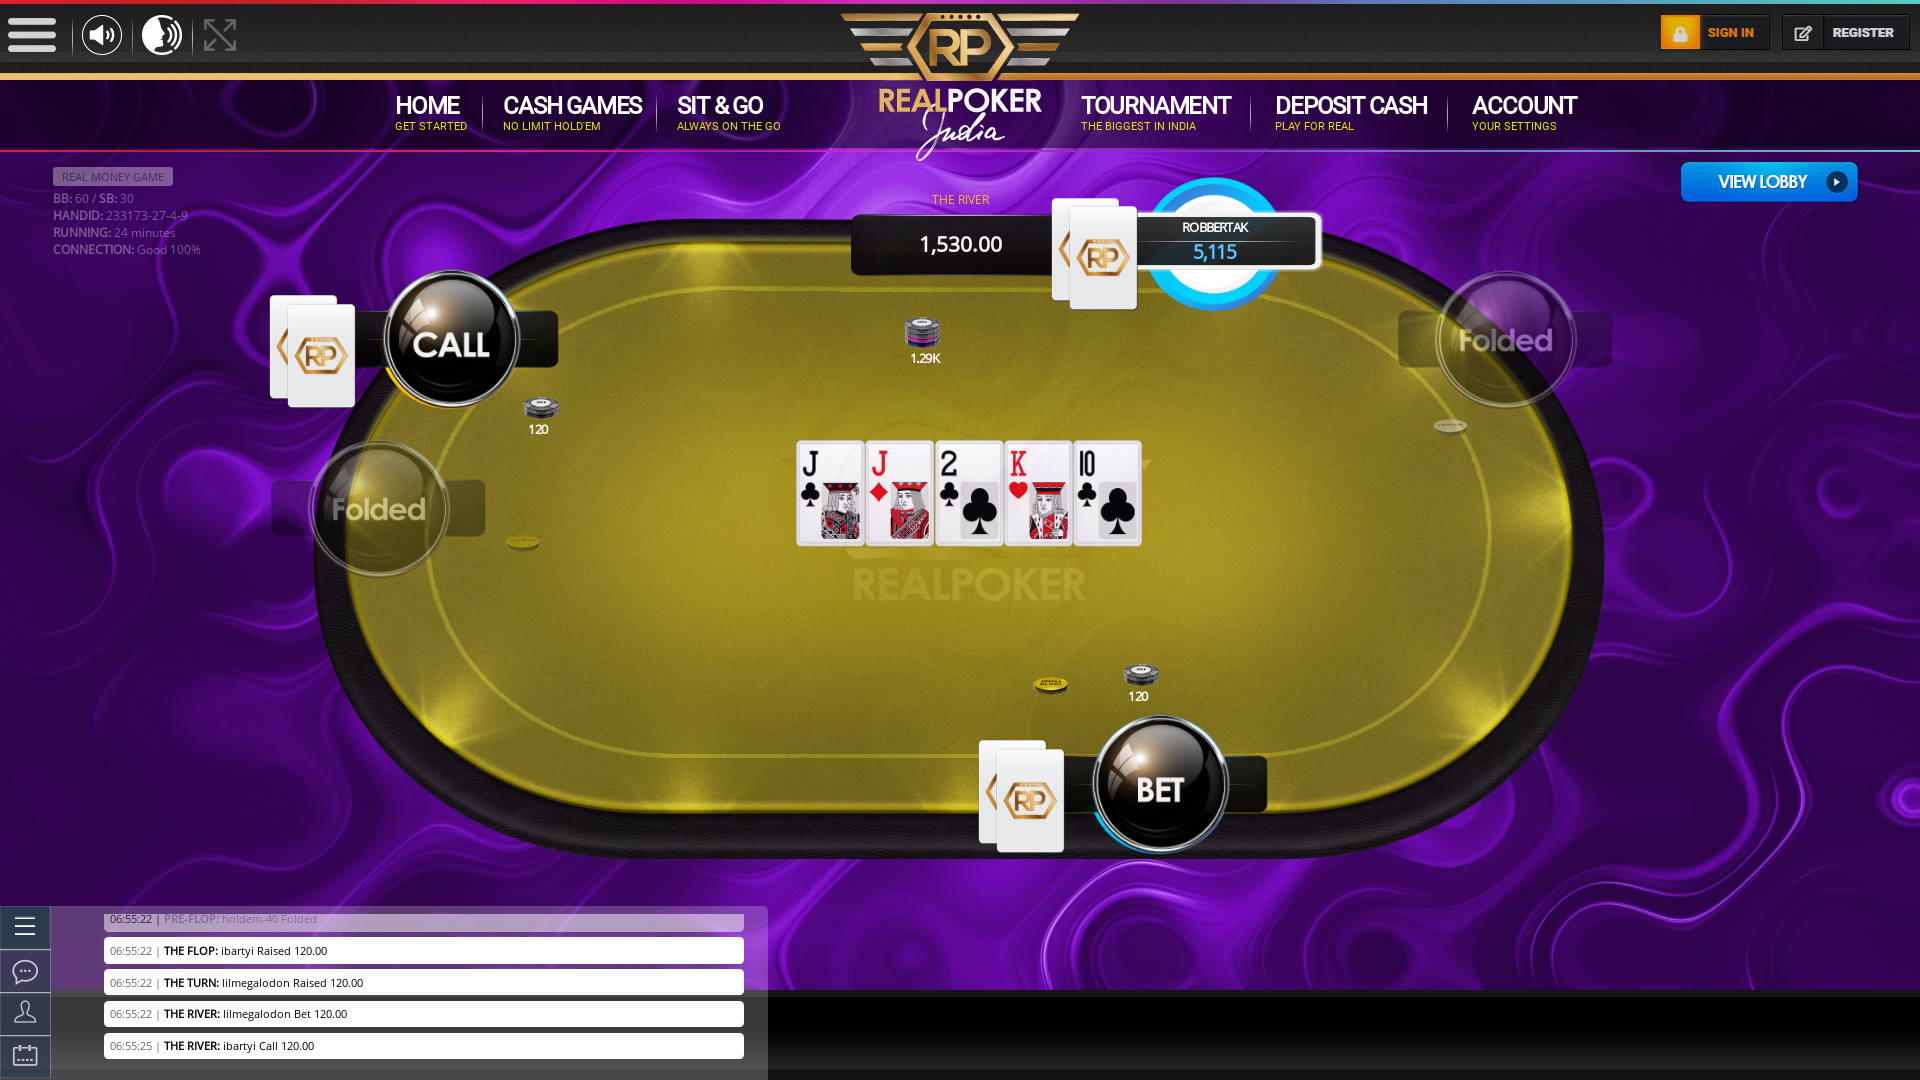 10 player poker in the 24th minute